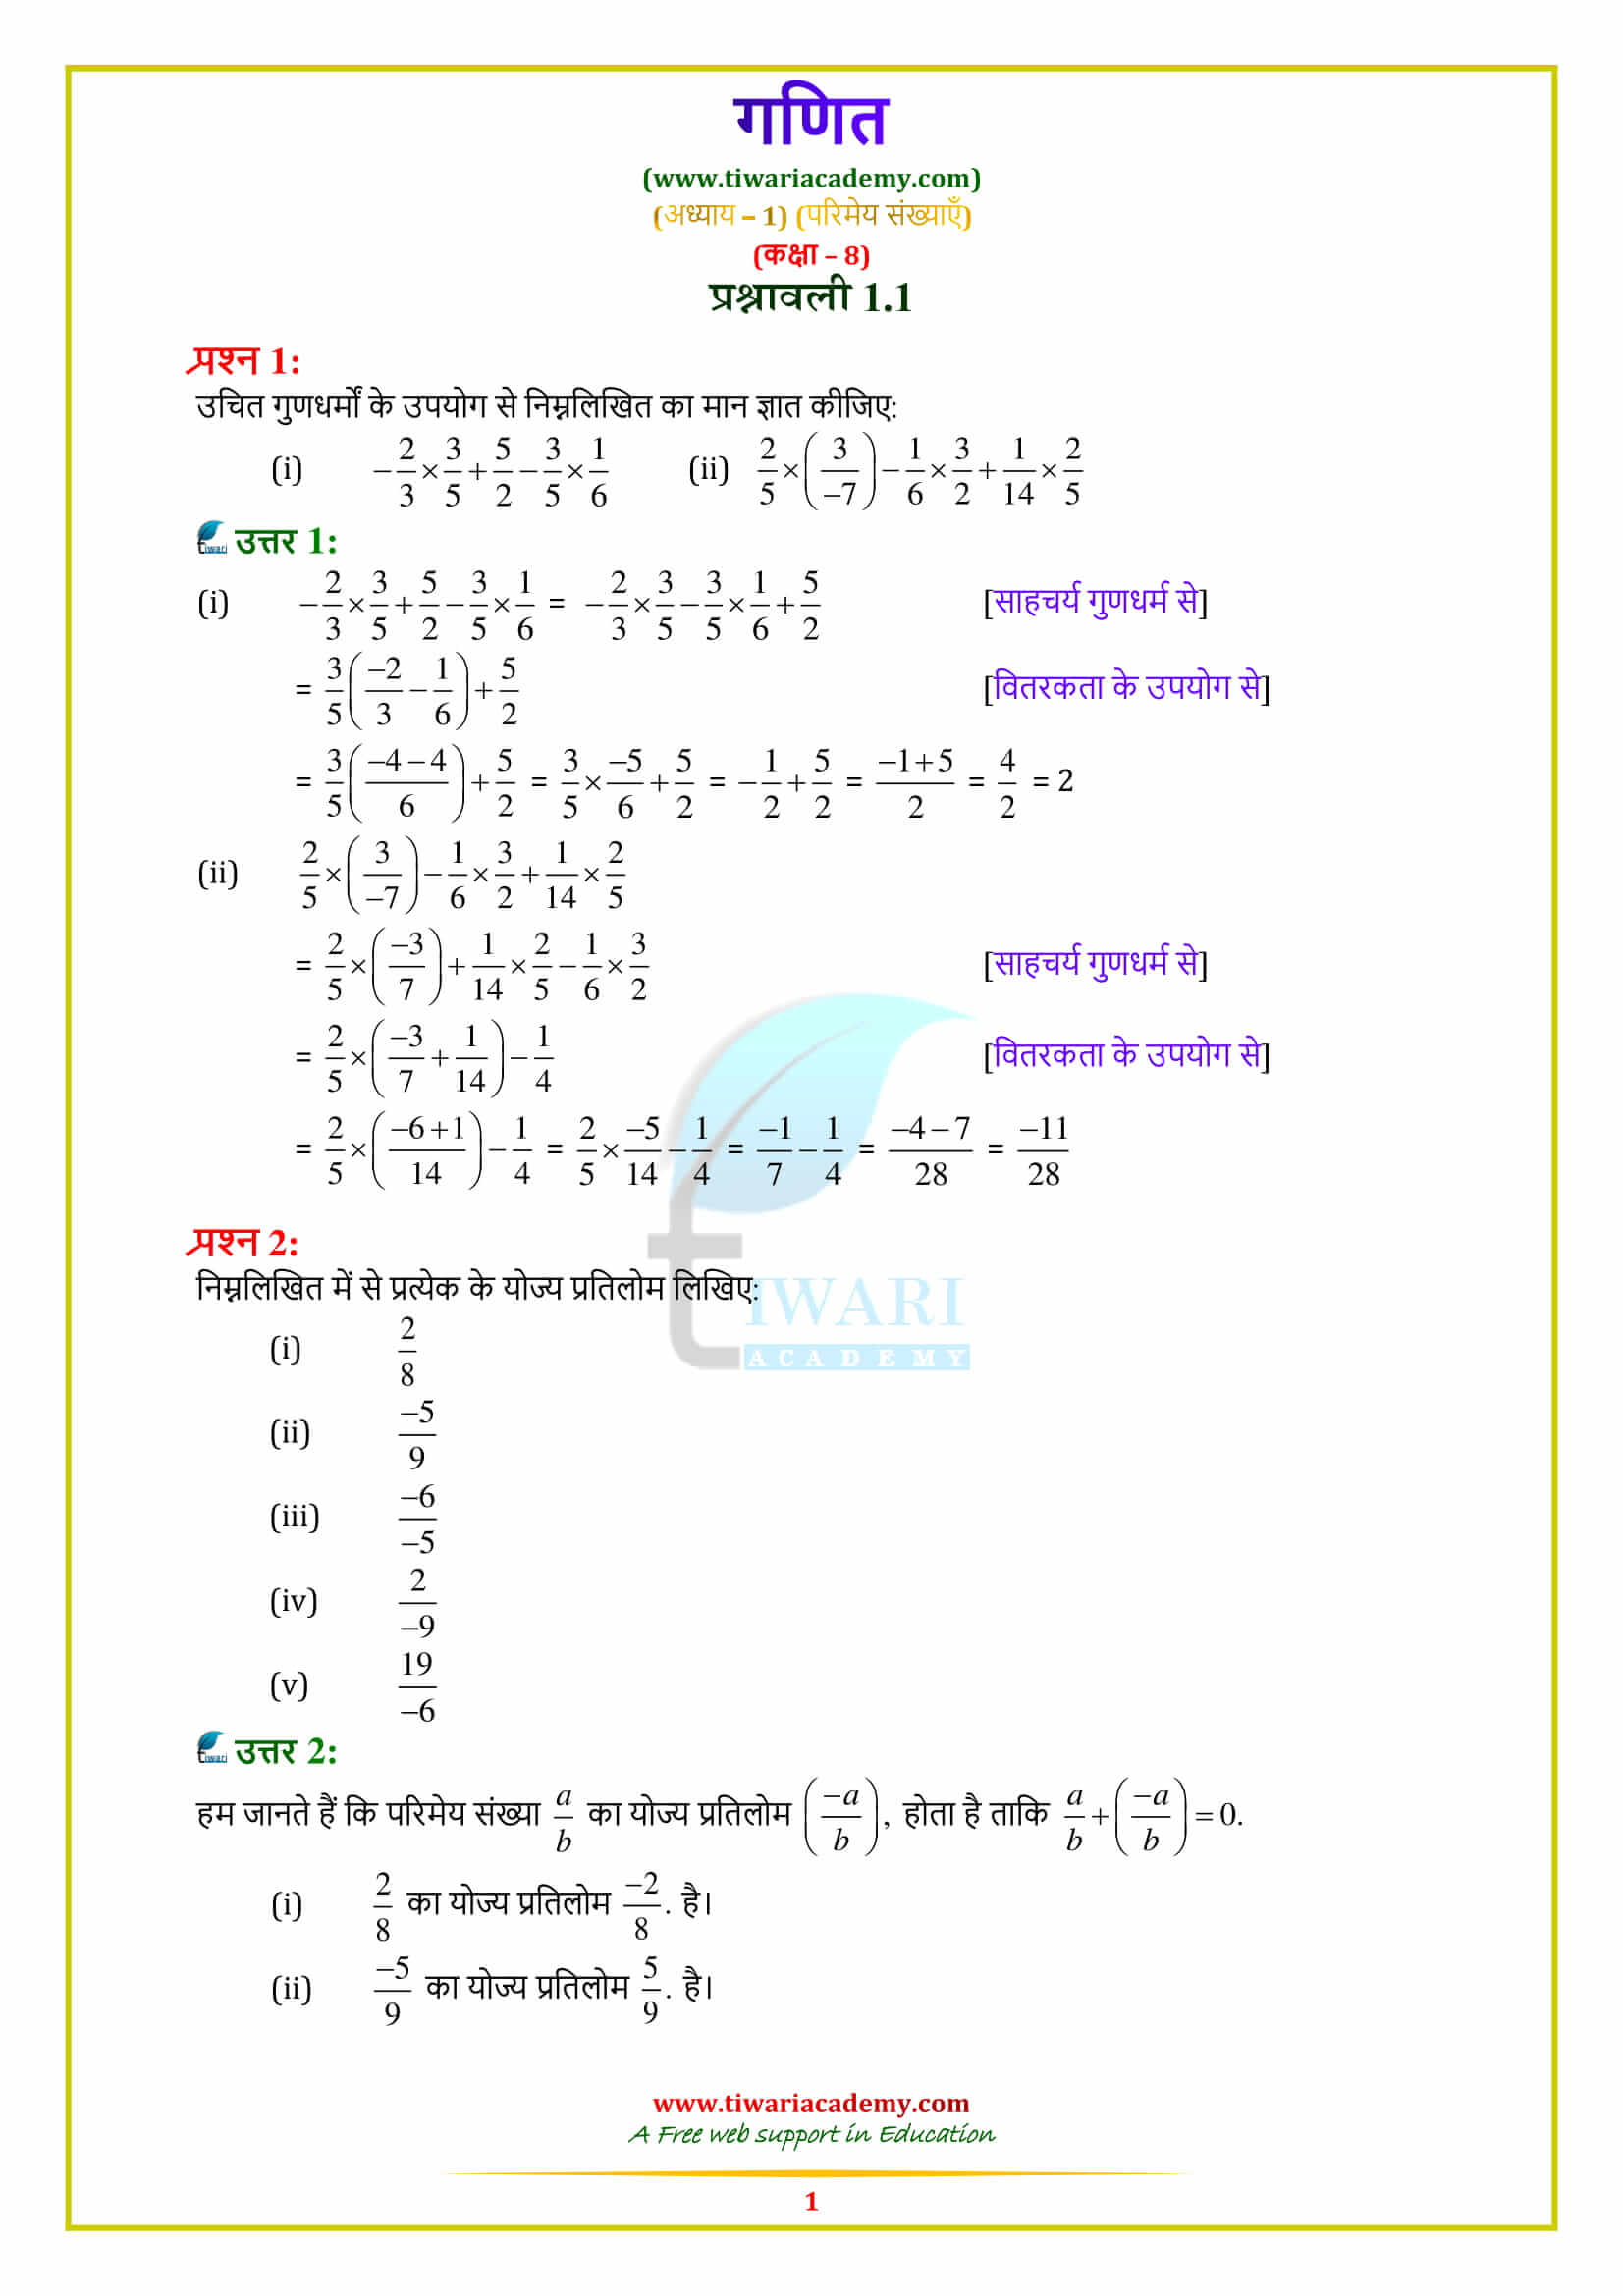 NCERT Solutions for Class 8 Maths Chapter 1 Exercise 1.1 in hindi